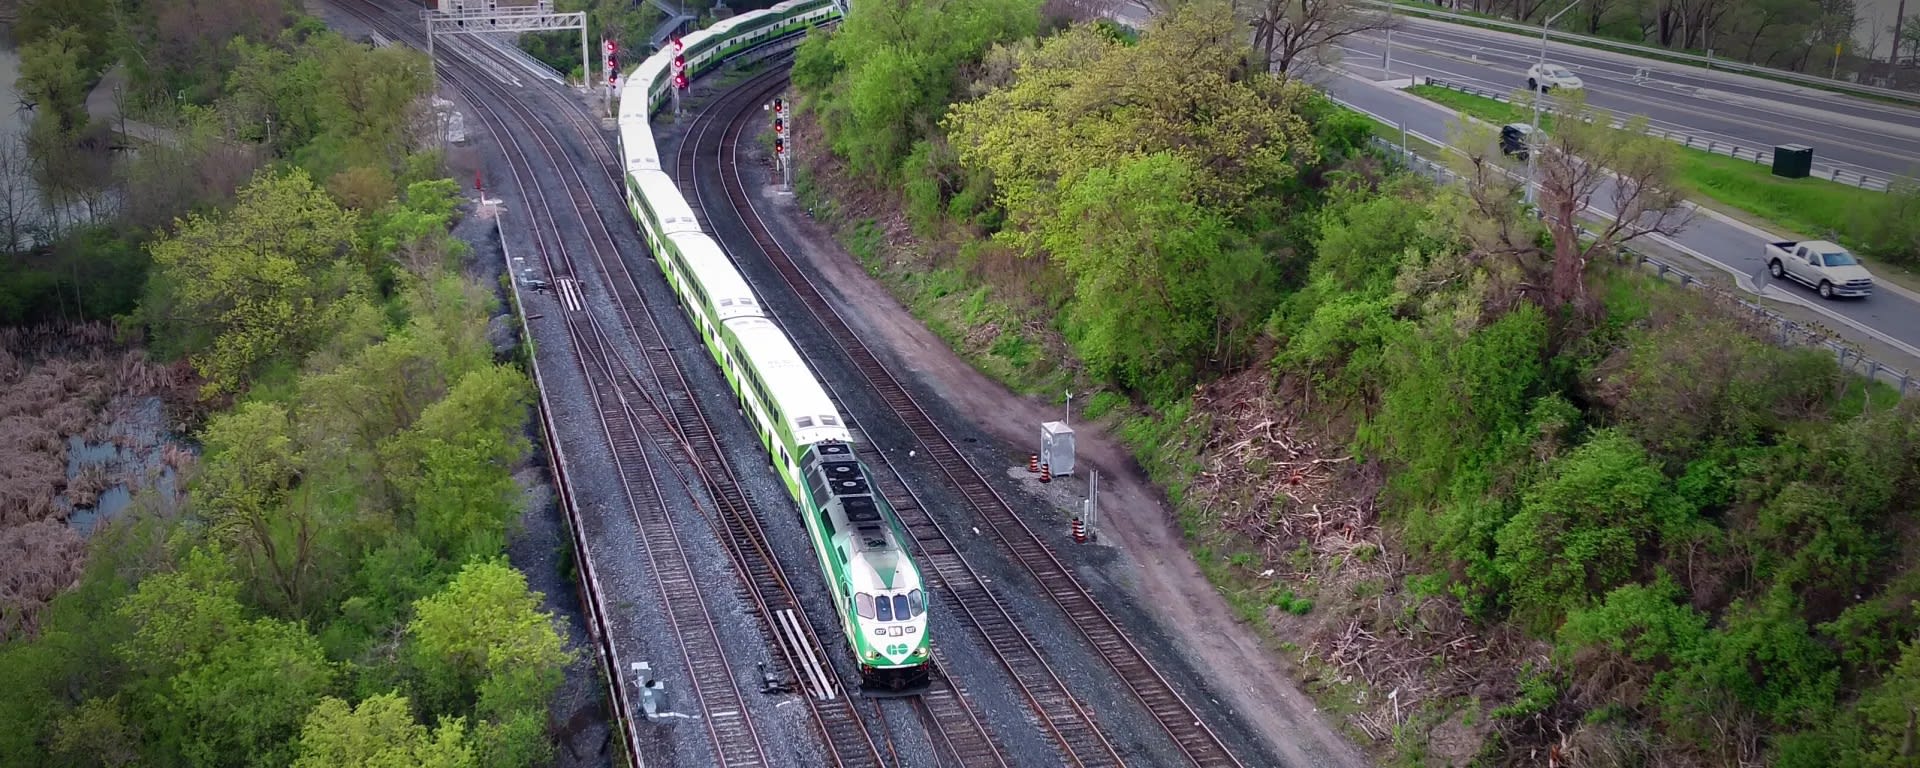 GO Transit’s rail lines around Hamilton are getting upgrades - find out why it matters to you.